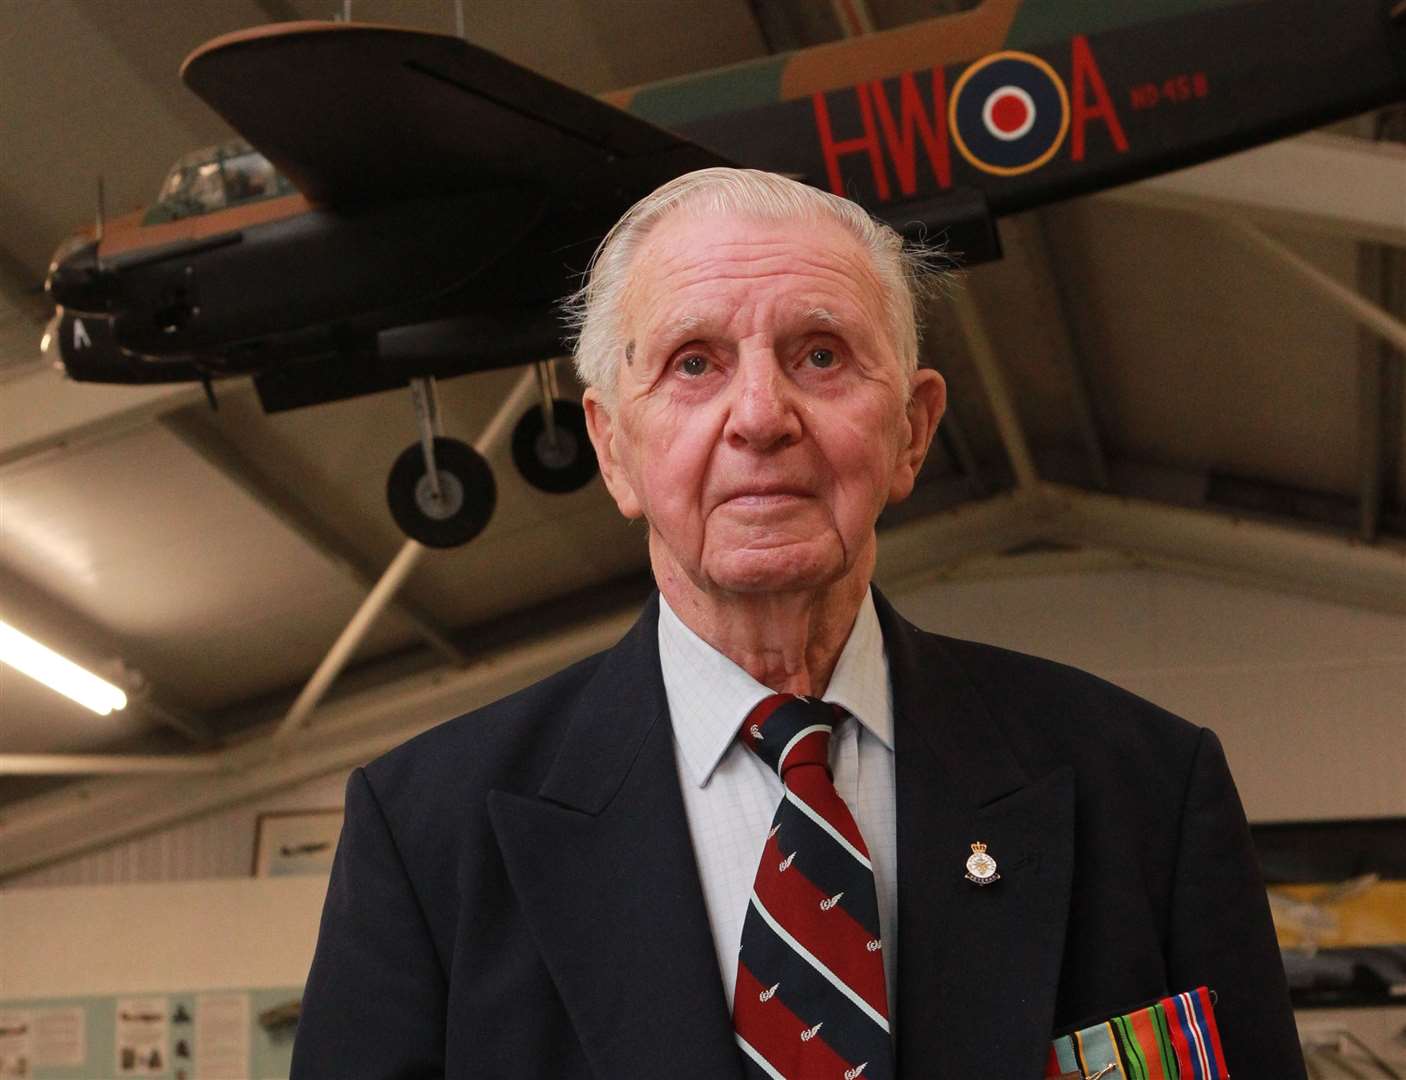 Dick Raymond returned to Lashenden Air Warfare Museum after 75 years